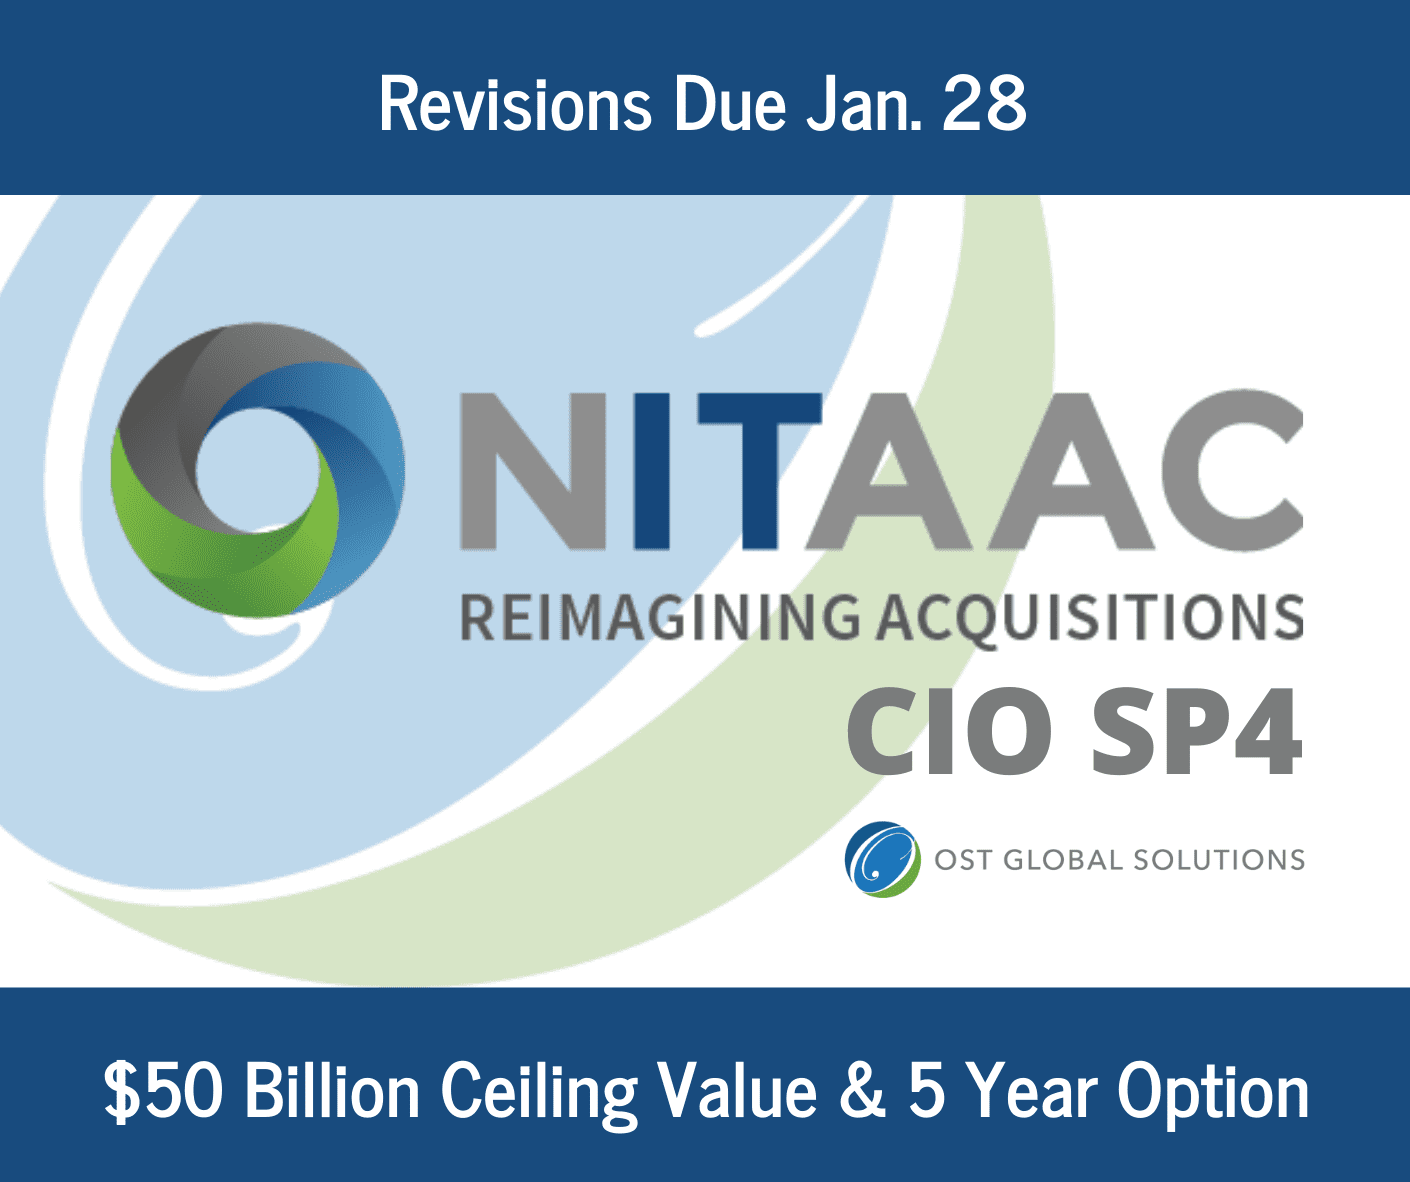 Update on $50 Billion CIO-SP4 Contract: Revisions Due Jan. 28